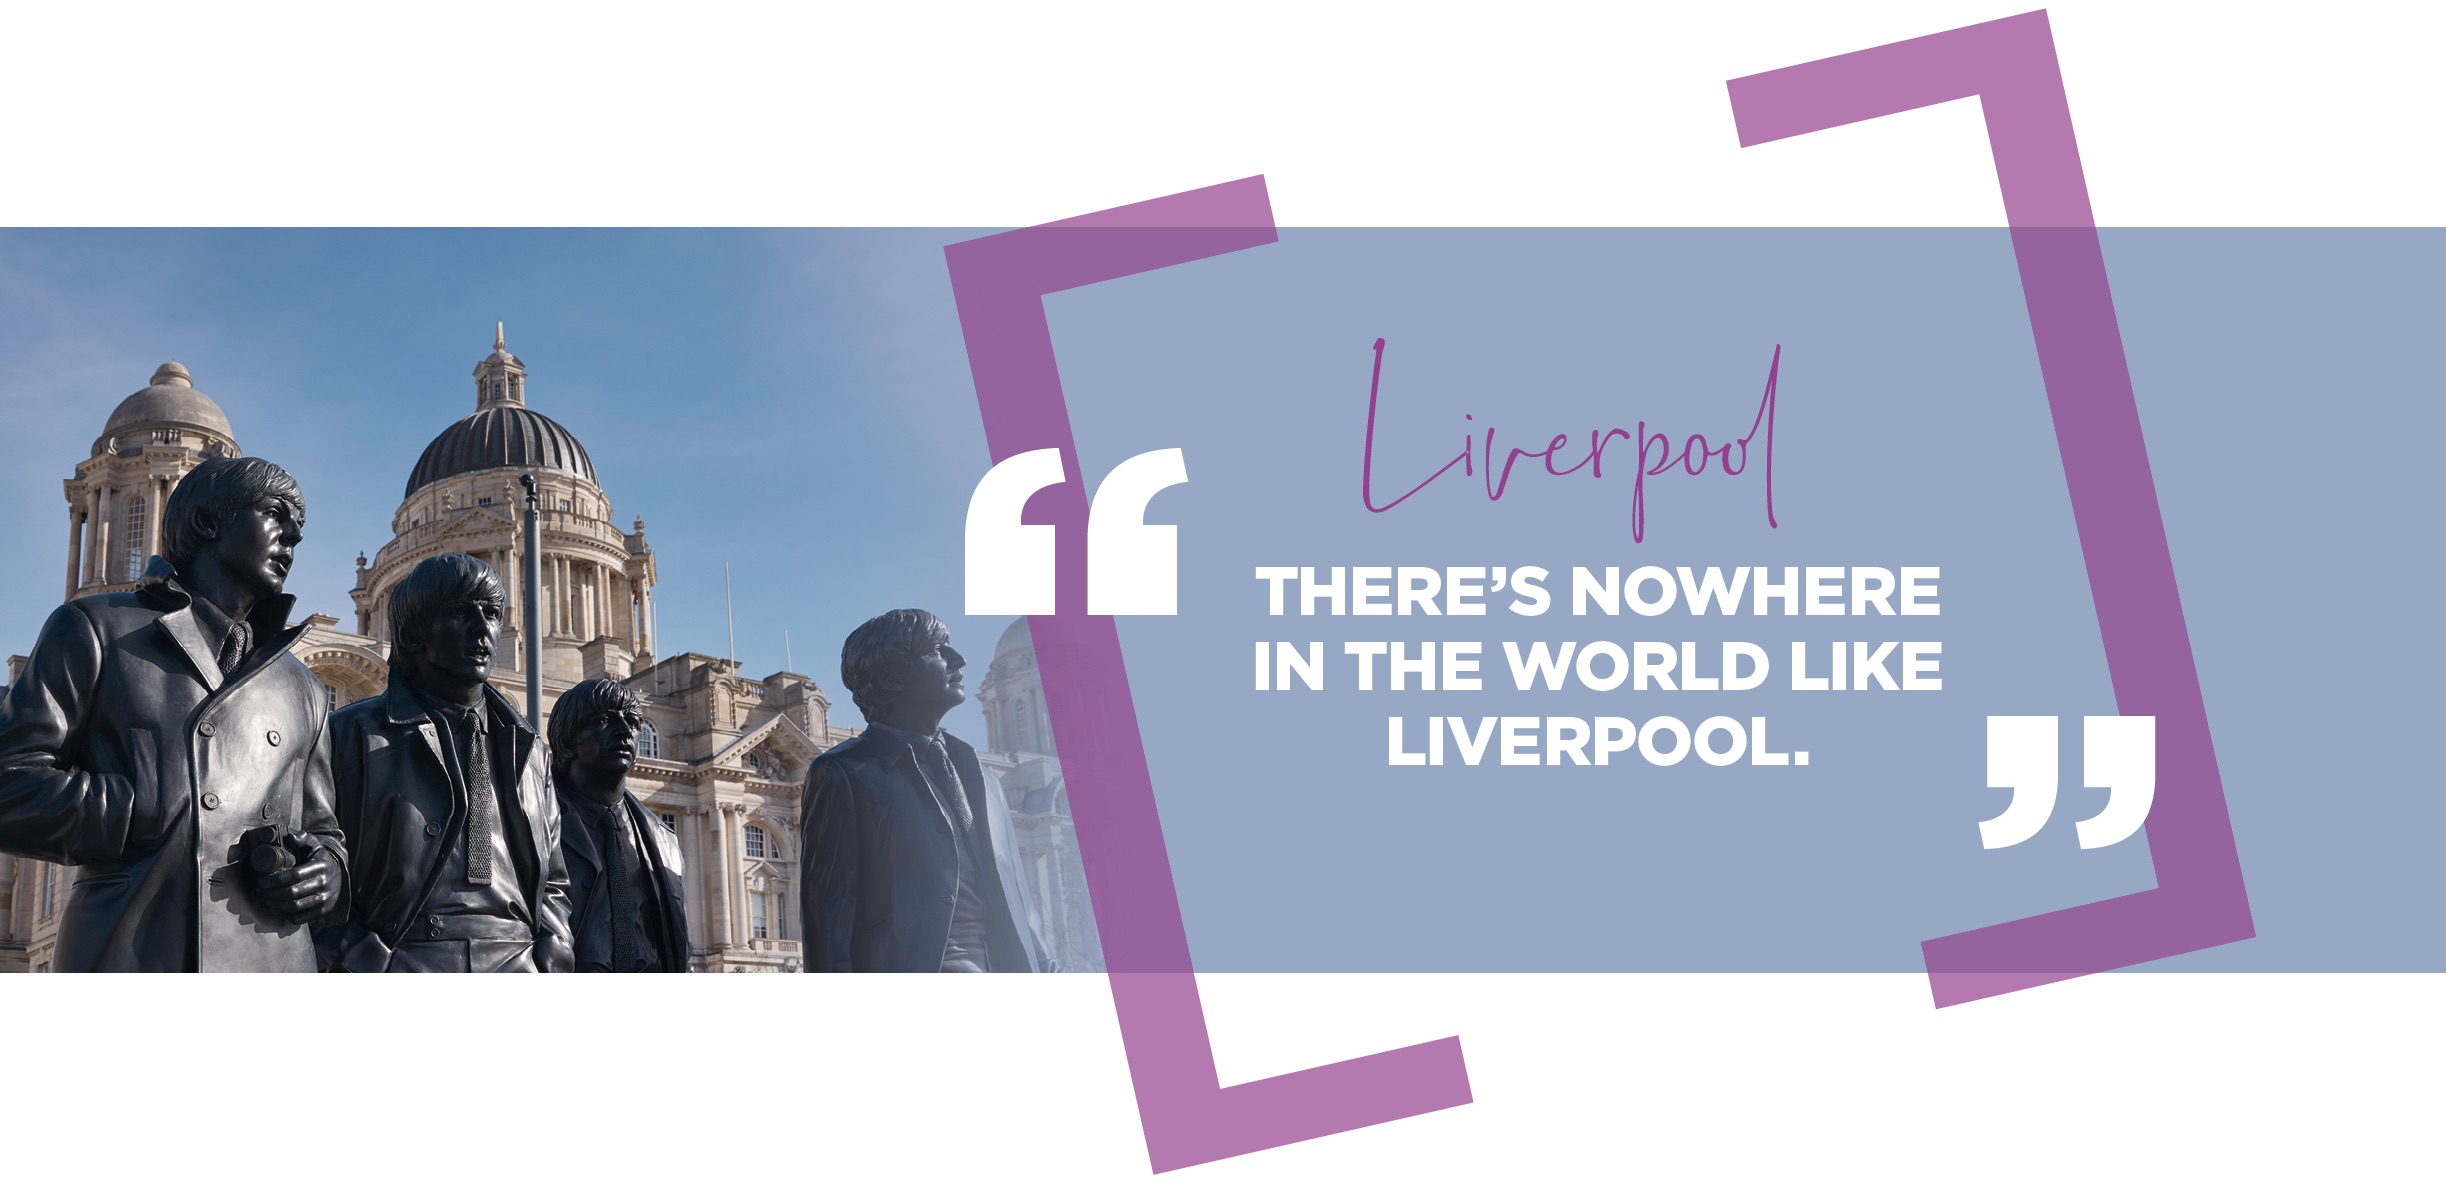 Quote about Liverpool "There's nowhere in the world like Liverpool"